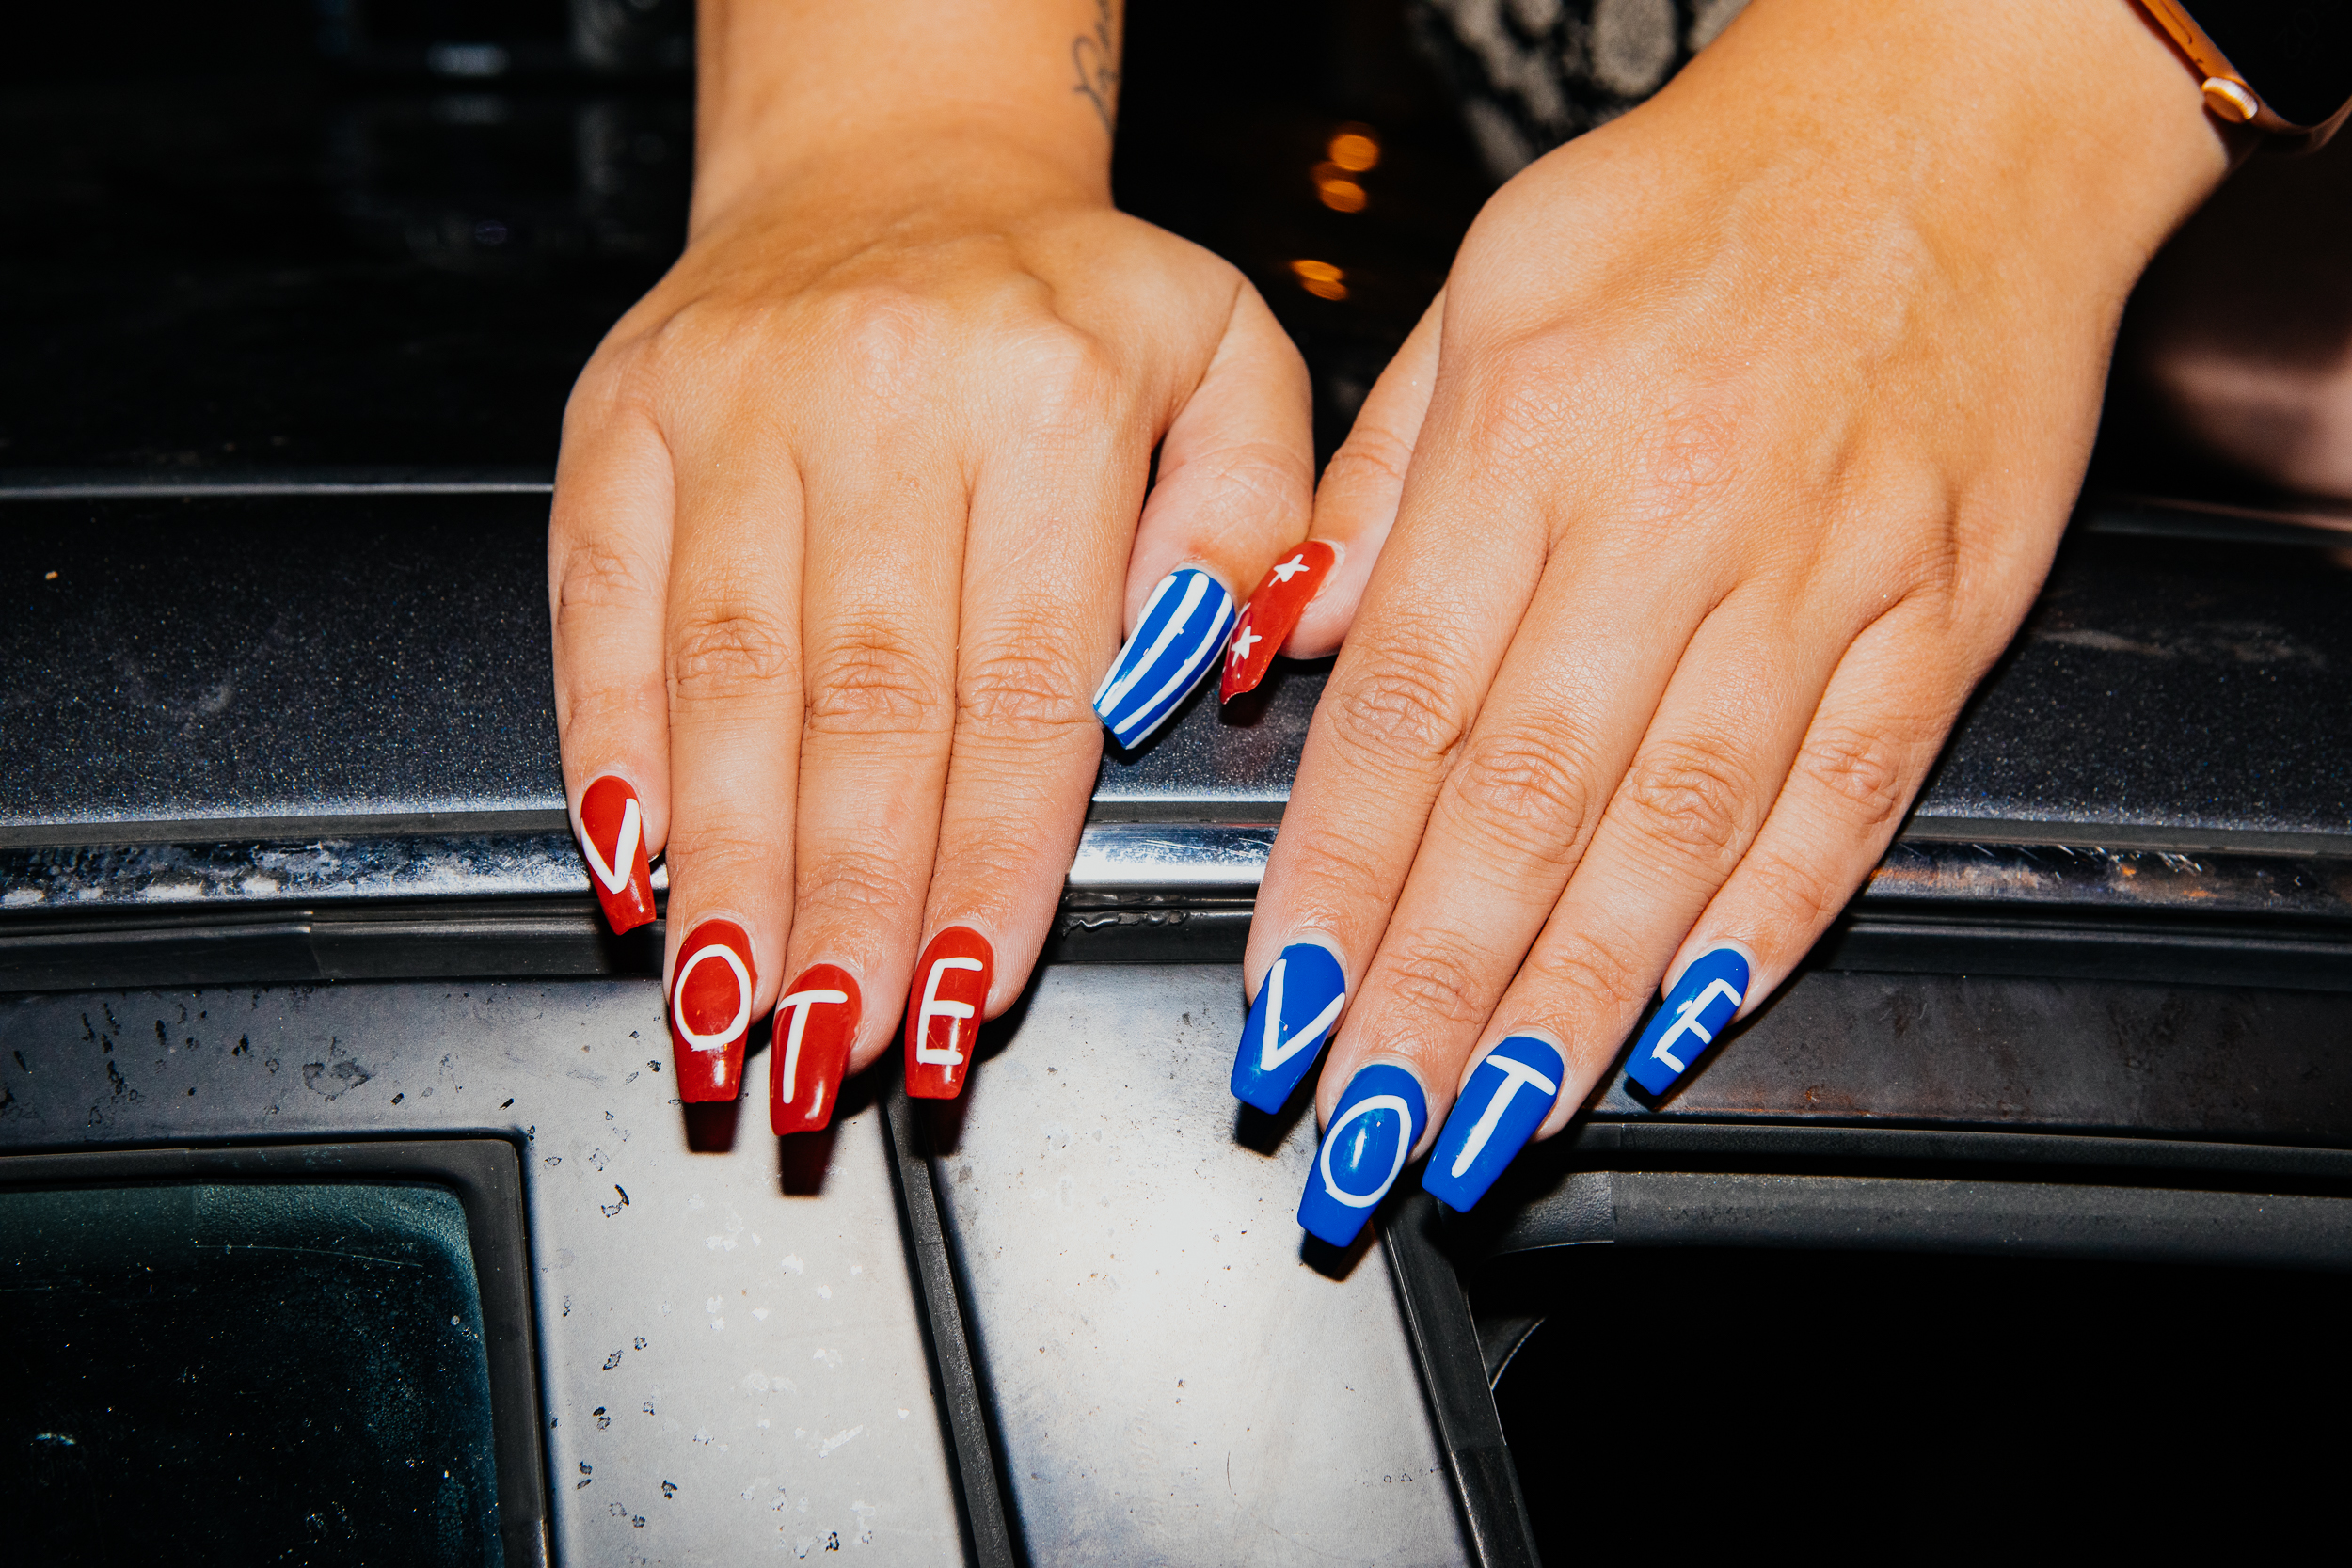 "Vote" nails are seen on Madison Kopie, 25, as she sits on her car outside the Chase Center. (Michelle Gustafson for TIME)